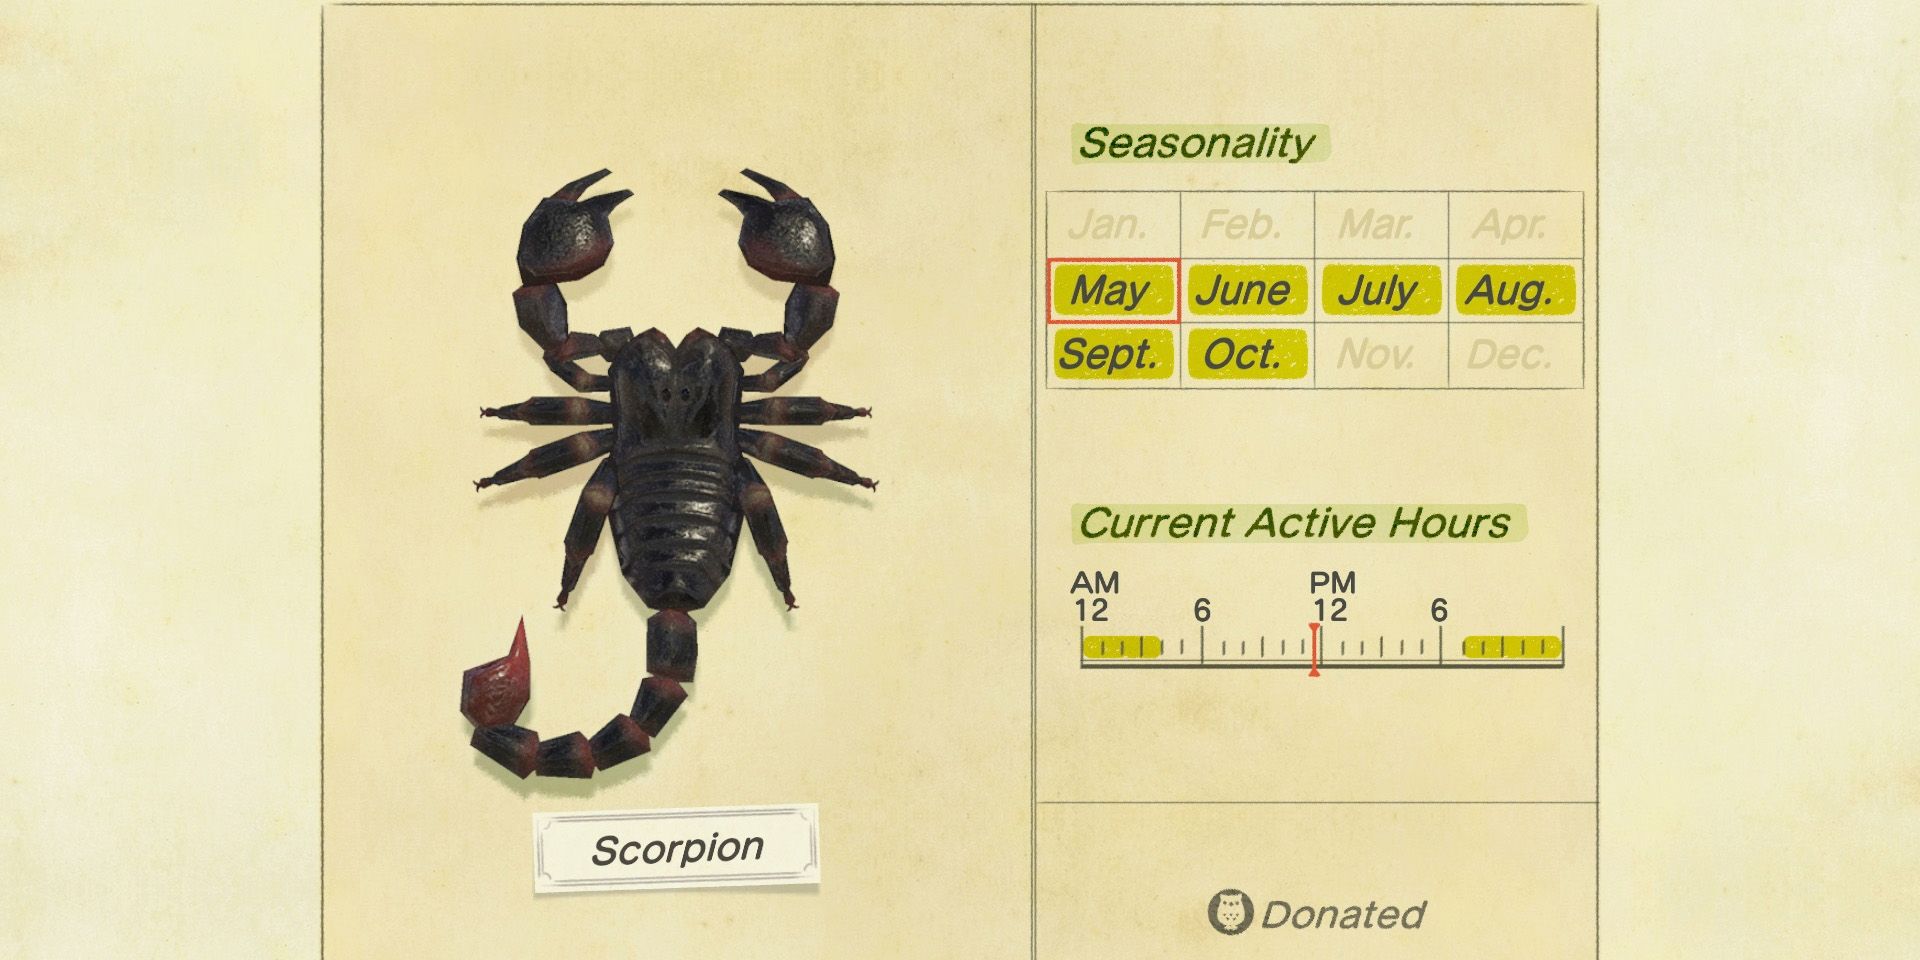 A Scorpion in Animal Crossing: New Horizons